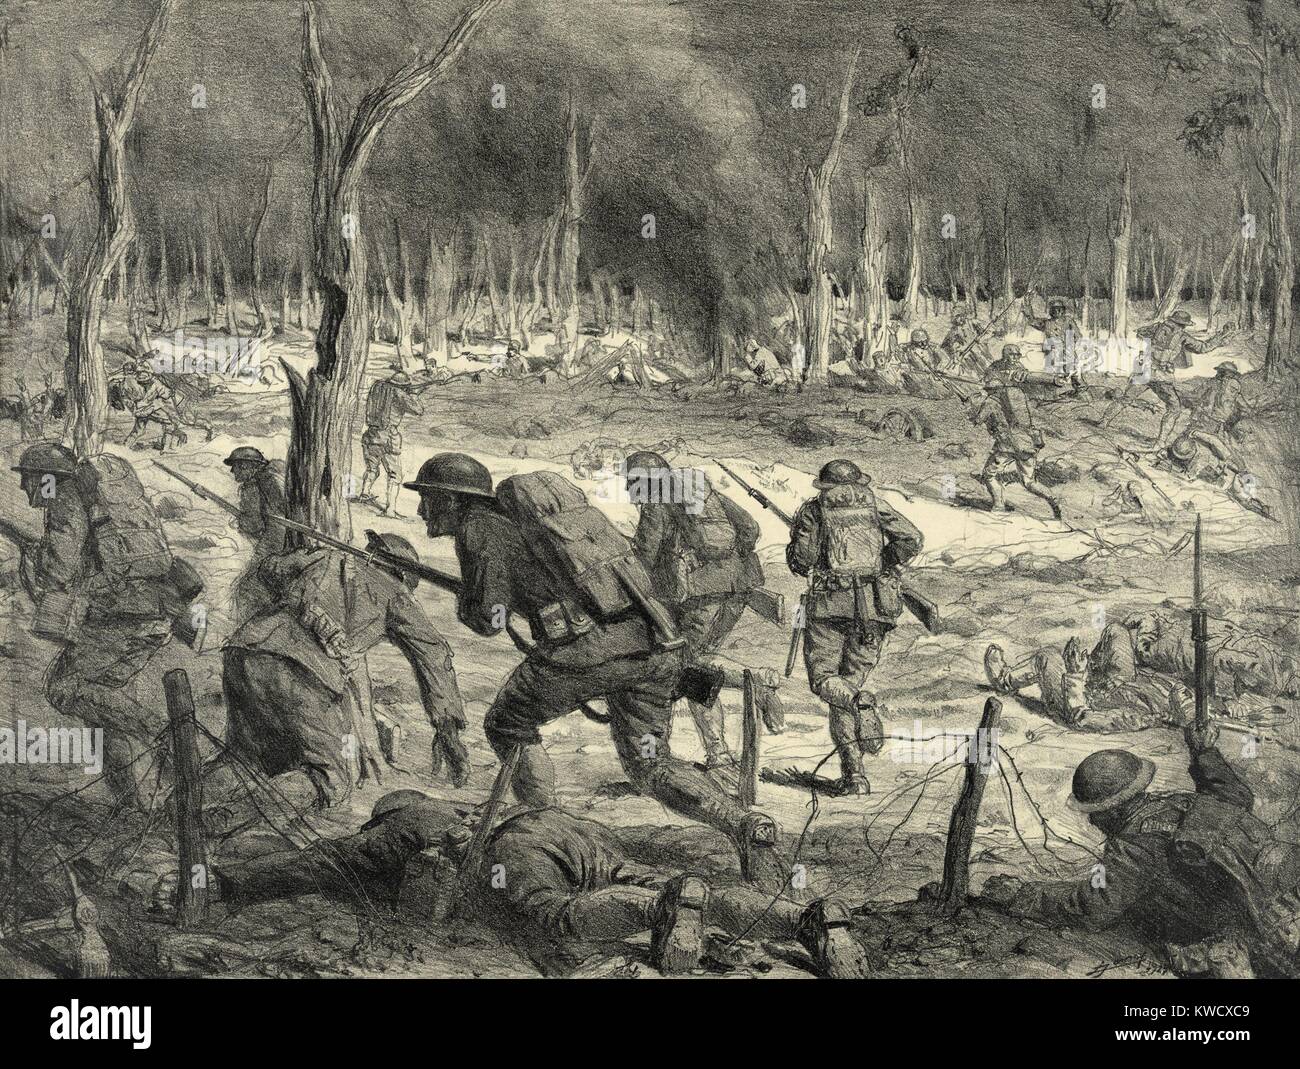 World War 1: Battle of the Argonne Forest. An infantry attack by American troops in woods of the Argonne Forest fought from Sept. 26, 1918, until the Armistice, Nov. 11, 1918. Lithograph by Lucien Jonas, 1927. (BSLOC 2013 1 204) Stock Photo